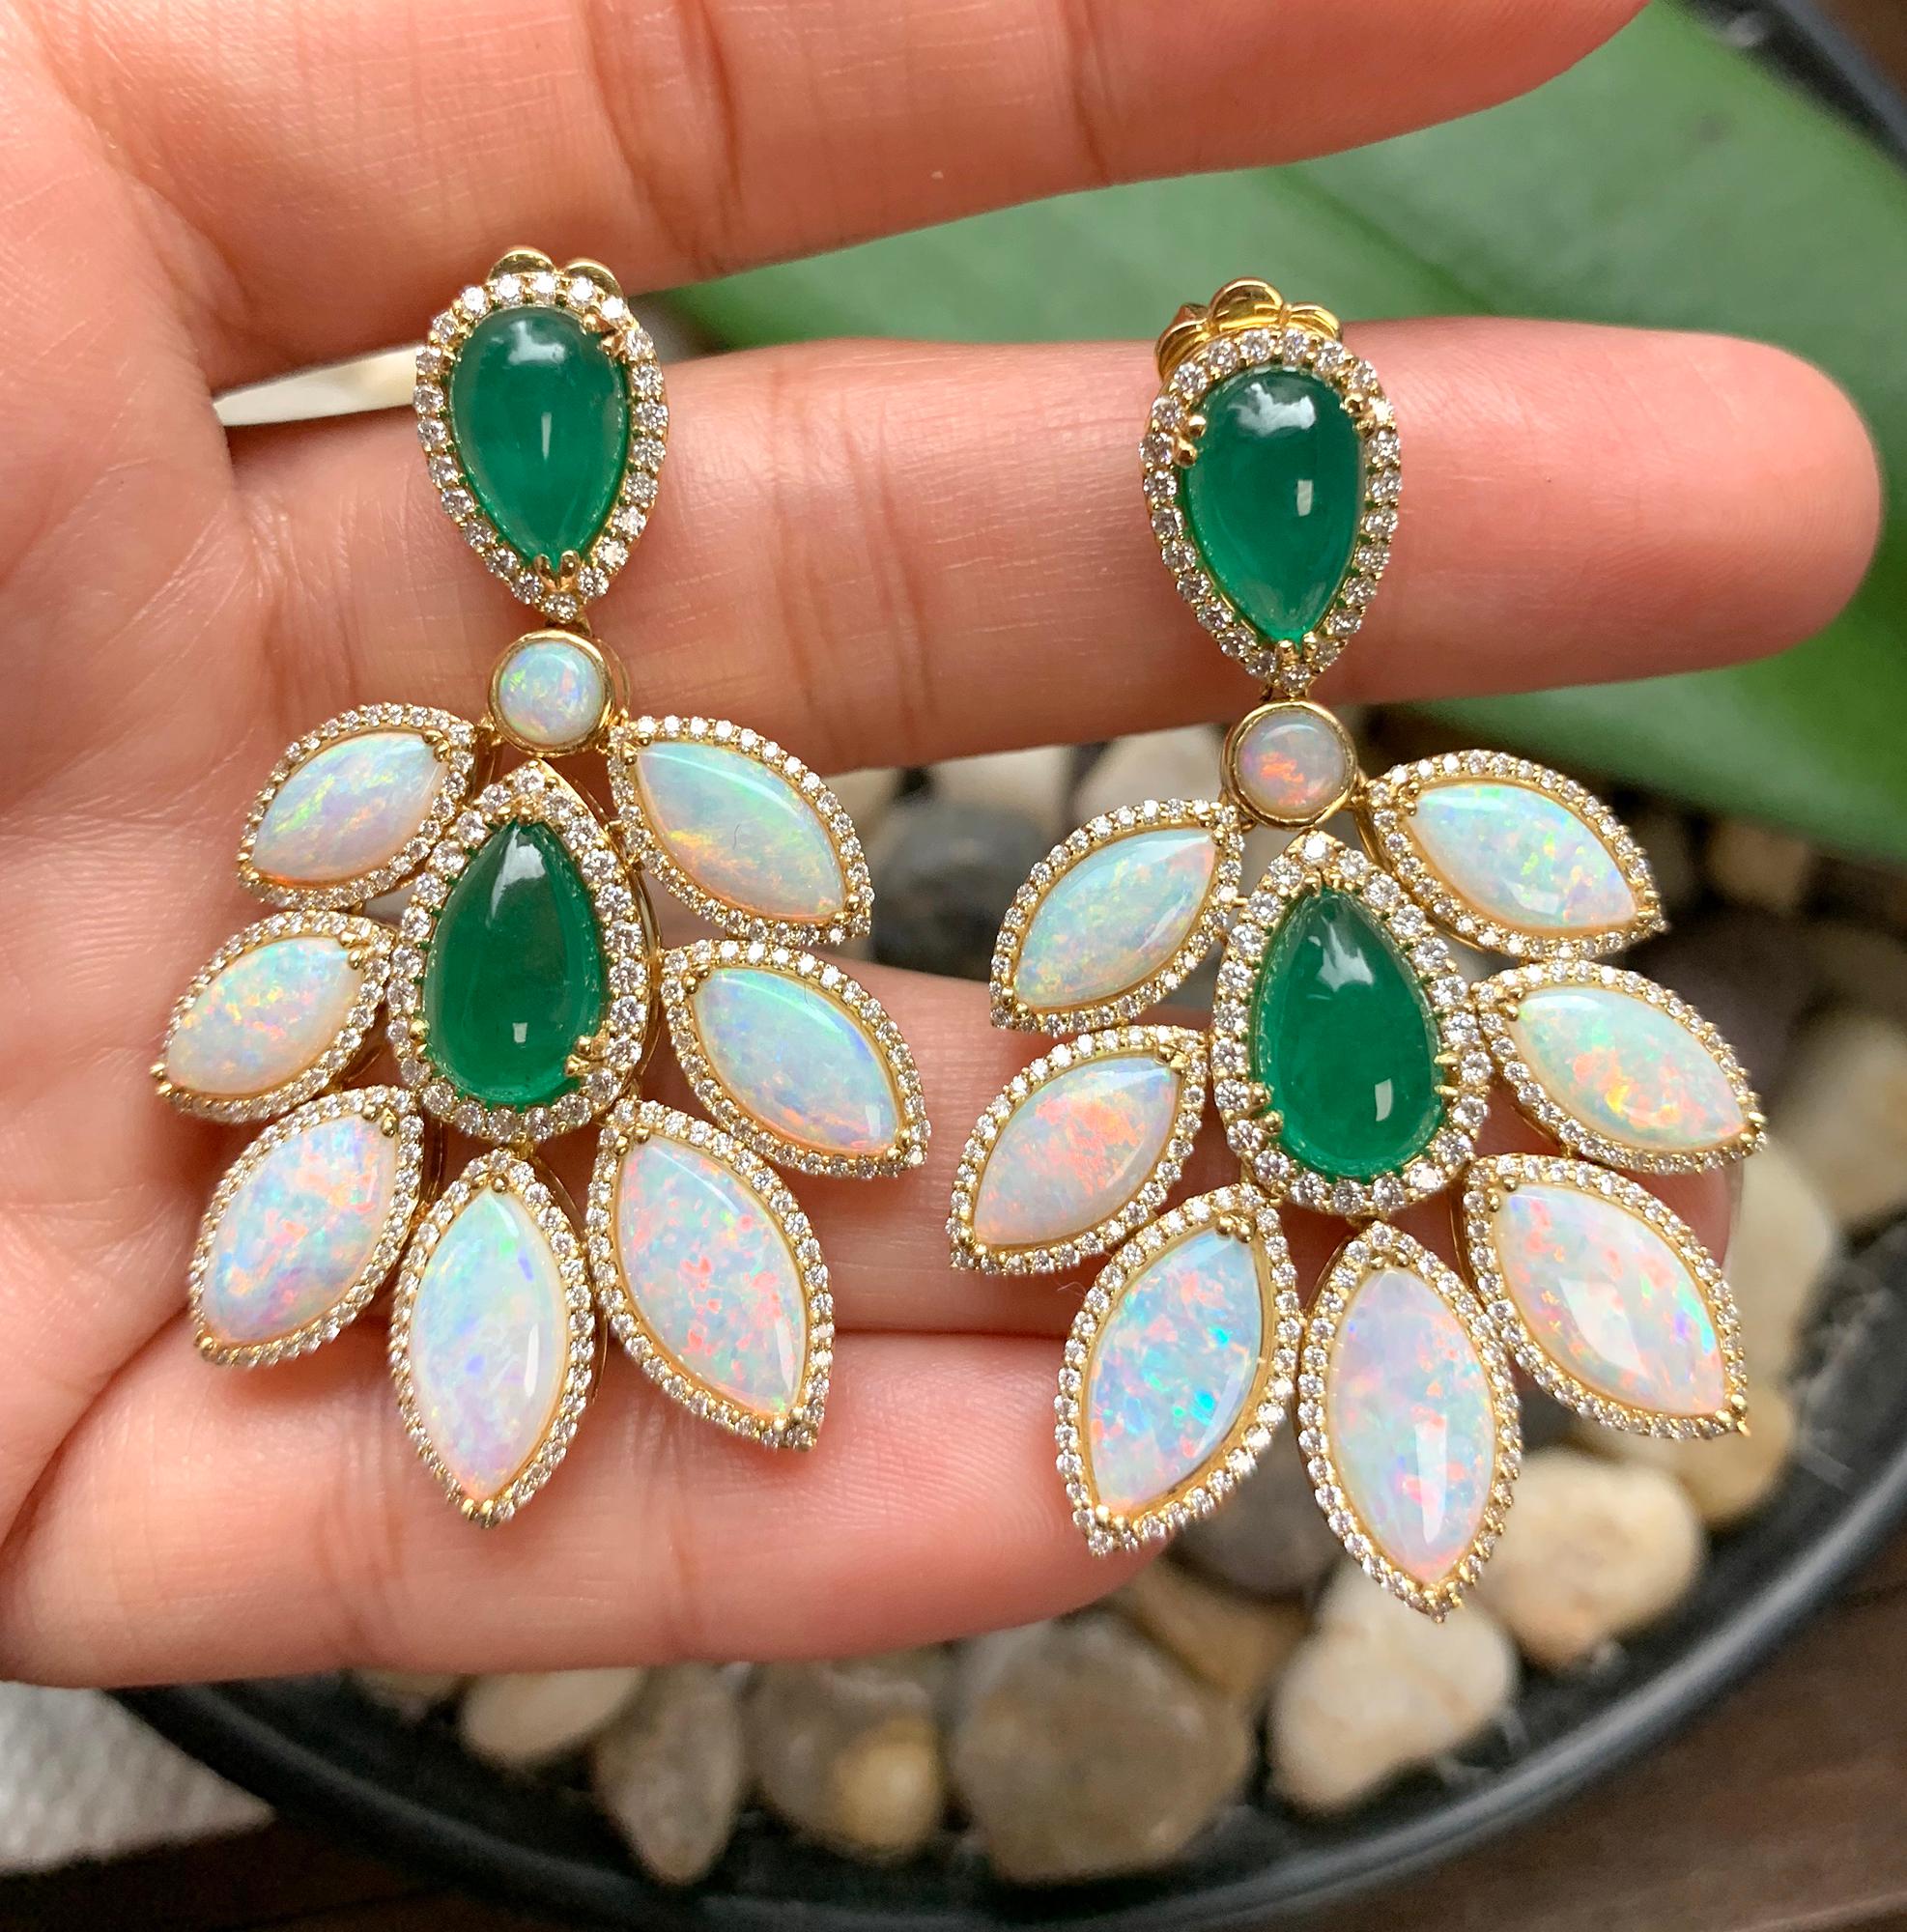 These Emerald Pear Shape Cabs and Opal Marquise Earrings in 18K Yellow Gold with Diamonds are a stunning pair of earrings from the 'G-One' Collection. The earrings feature pear-shaped cabochon-cut emeralds and marquise-cut opals, both set in 18K